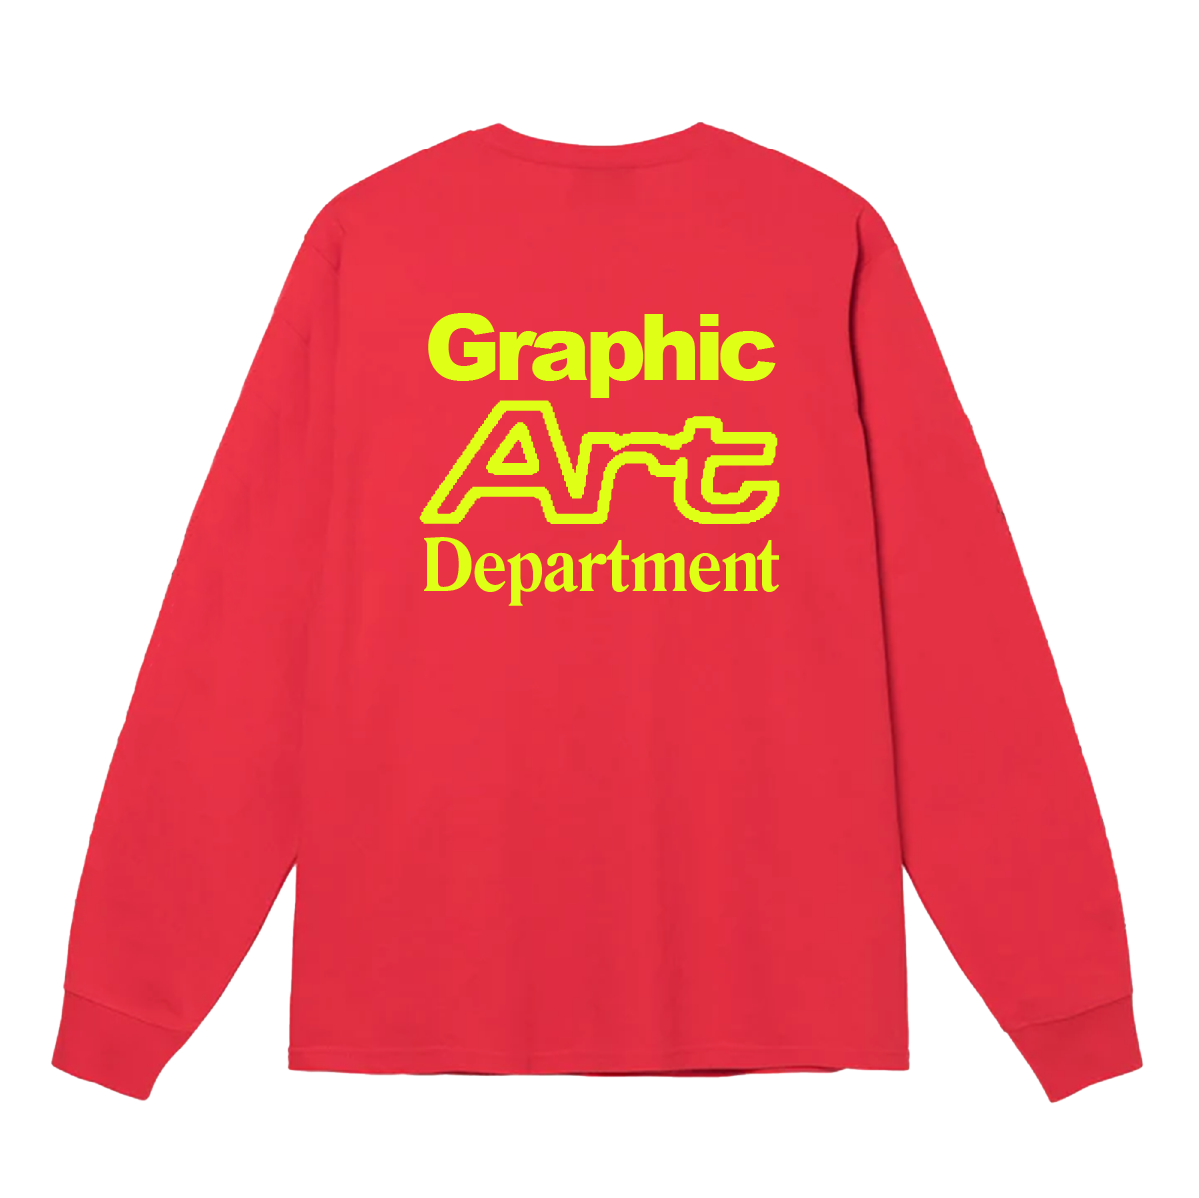 Graphic Art Department L/S Red